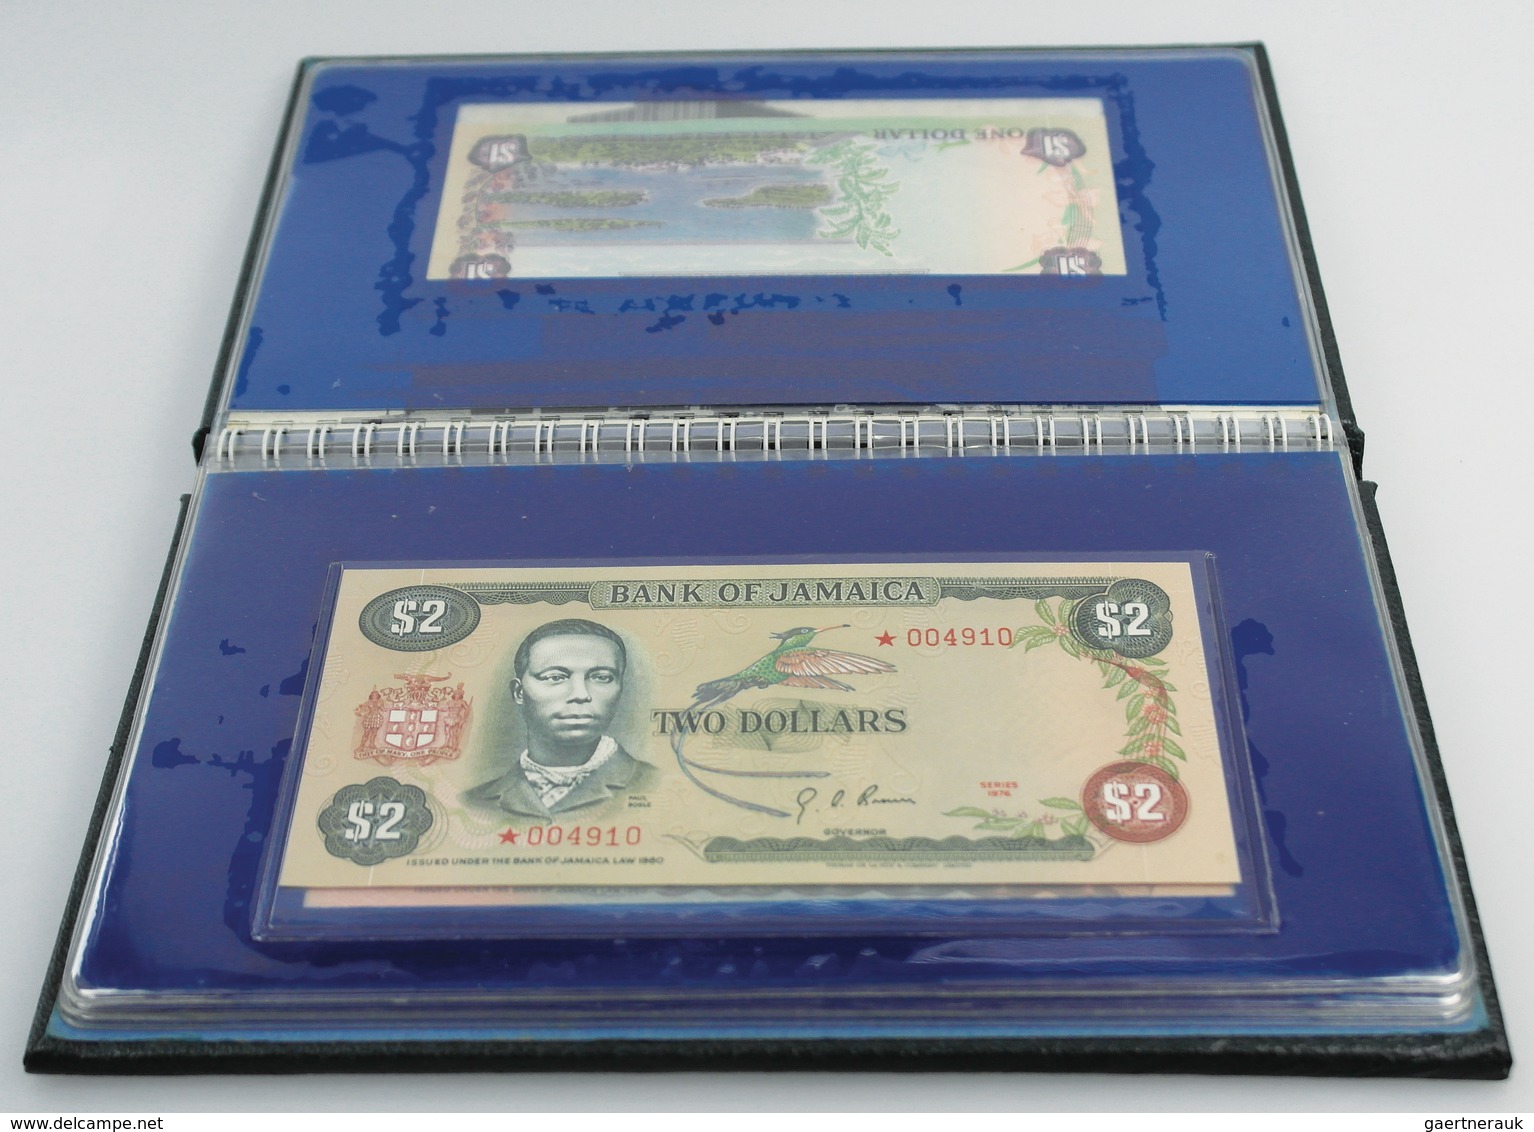 01886 Jamaica: Offical Currency Album Of The Bank Of Jamaica, With Certificate, Containing Notes With "Sta - Giamaica